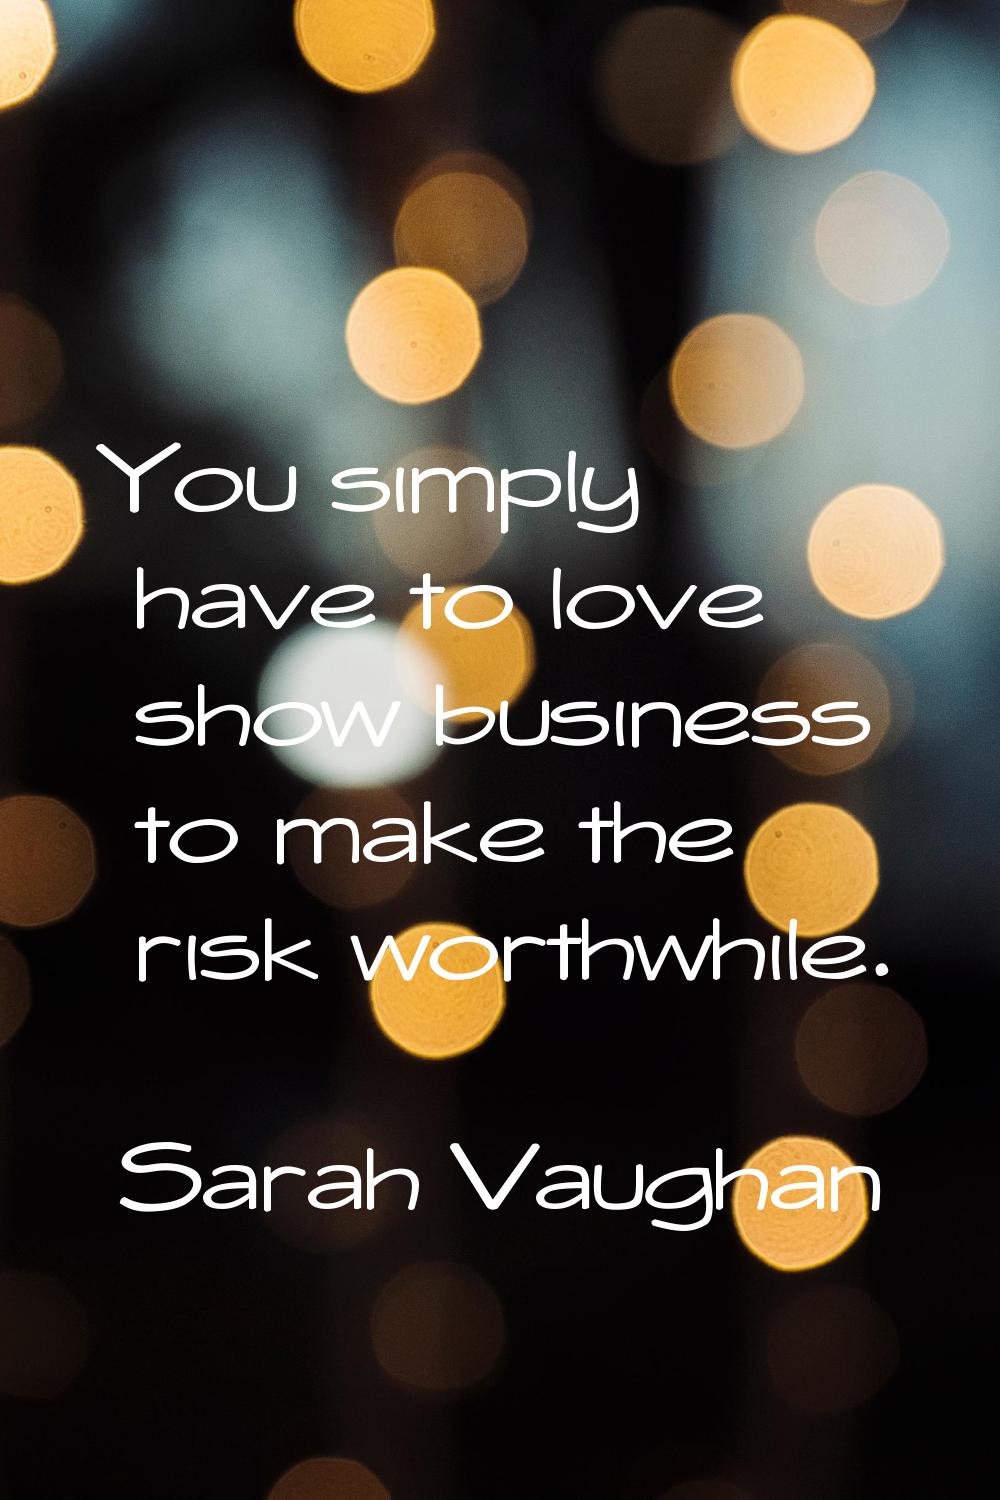 You simply have to love show business to make the risk worthwhile.